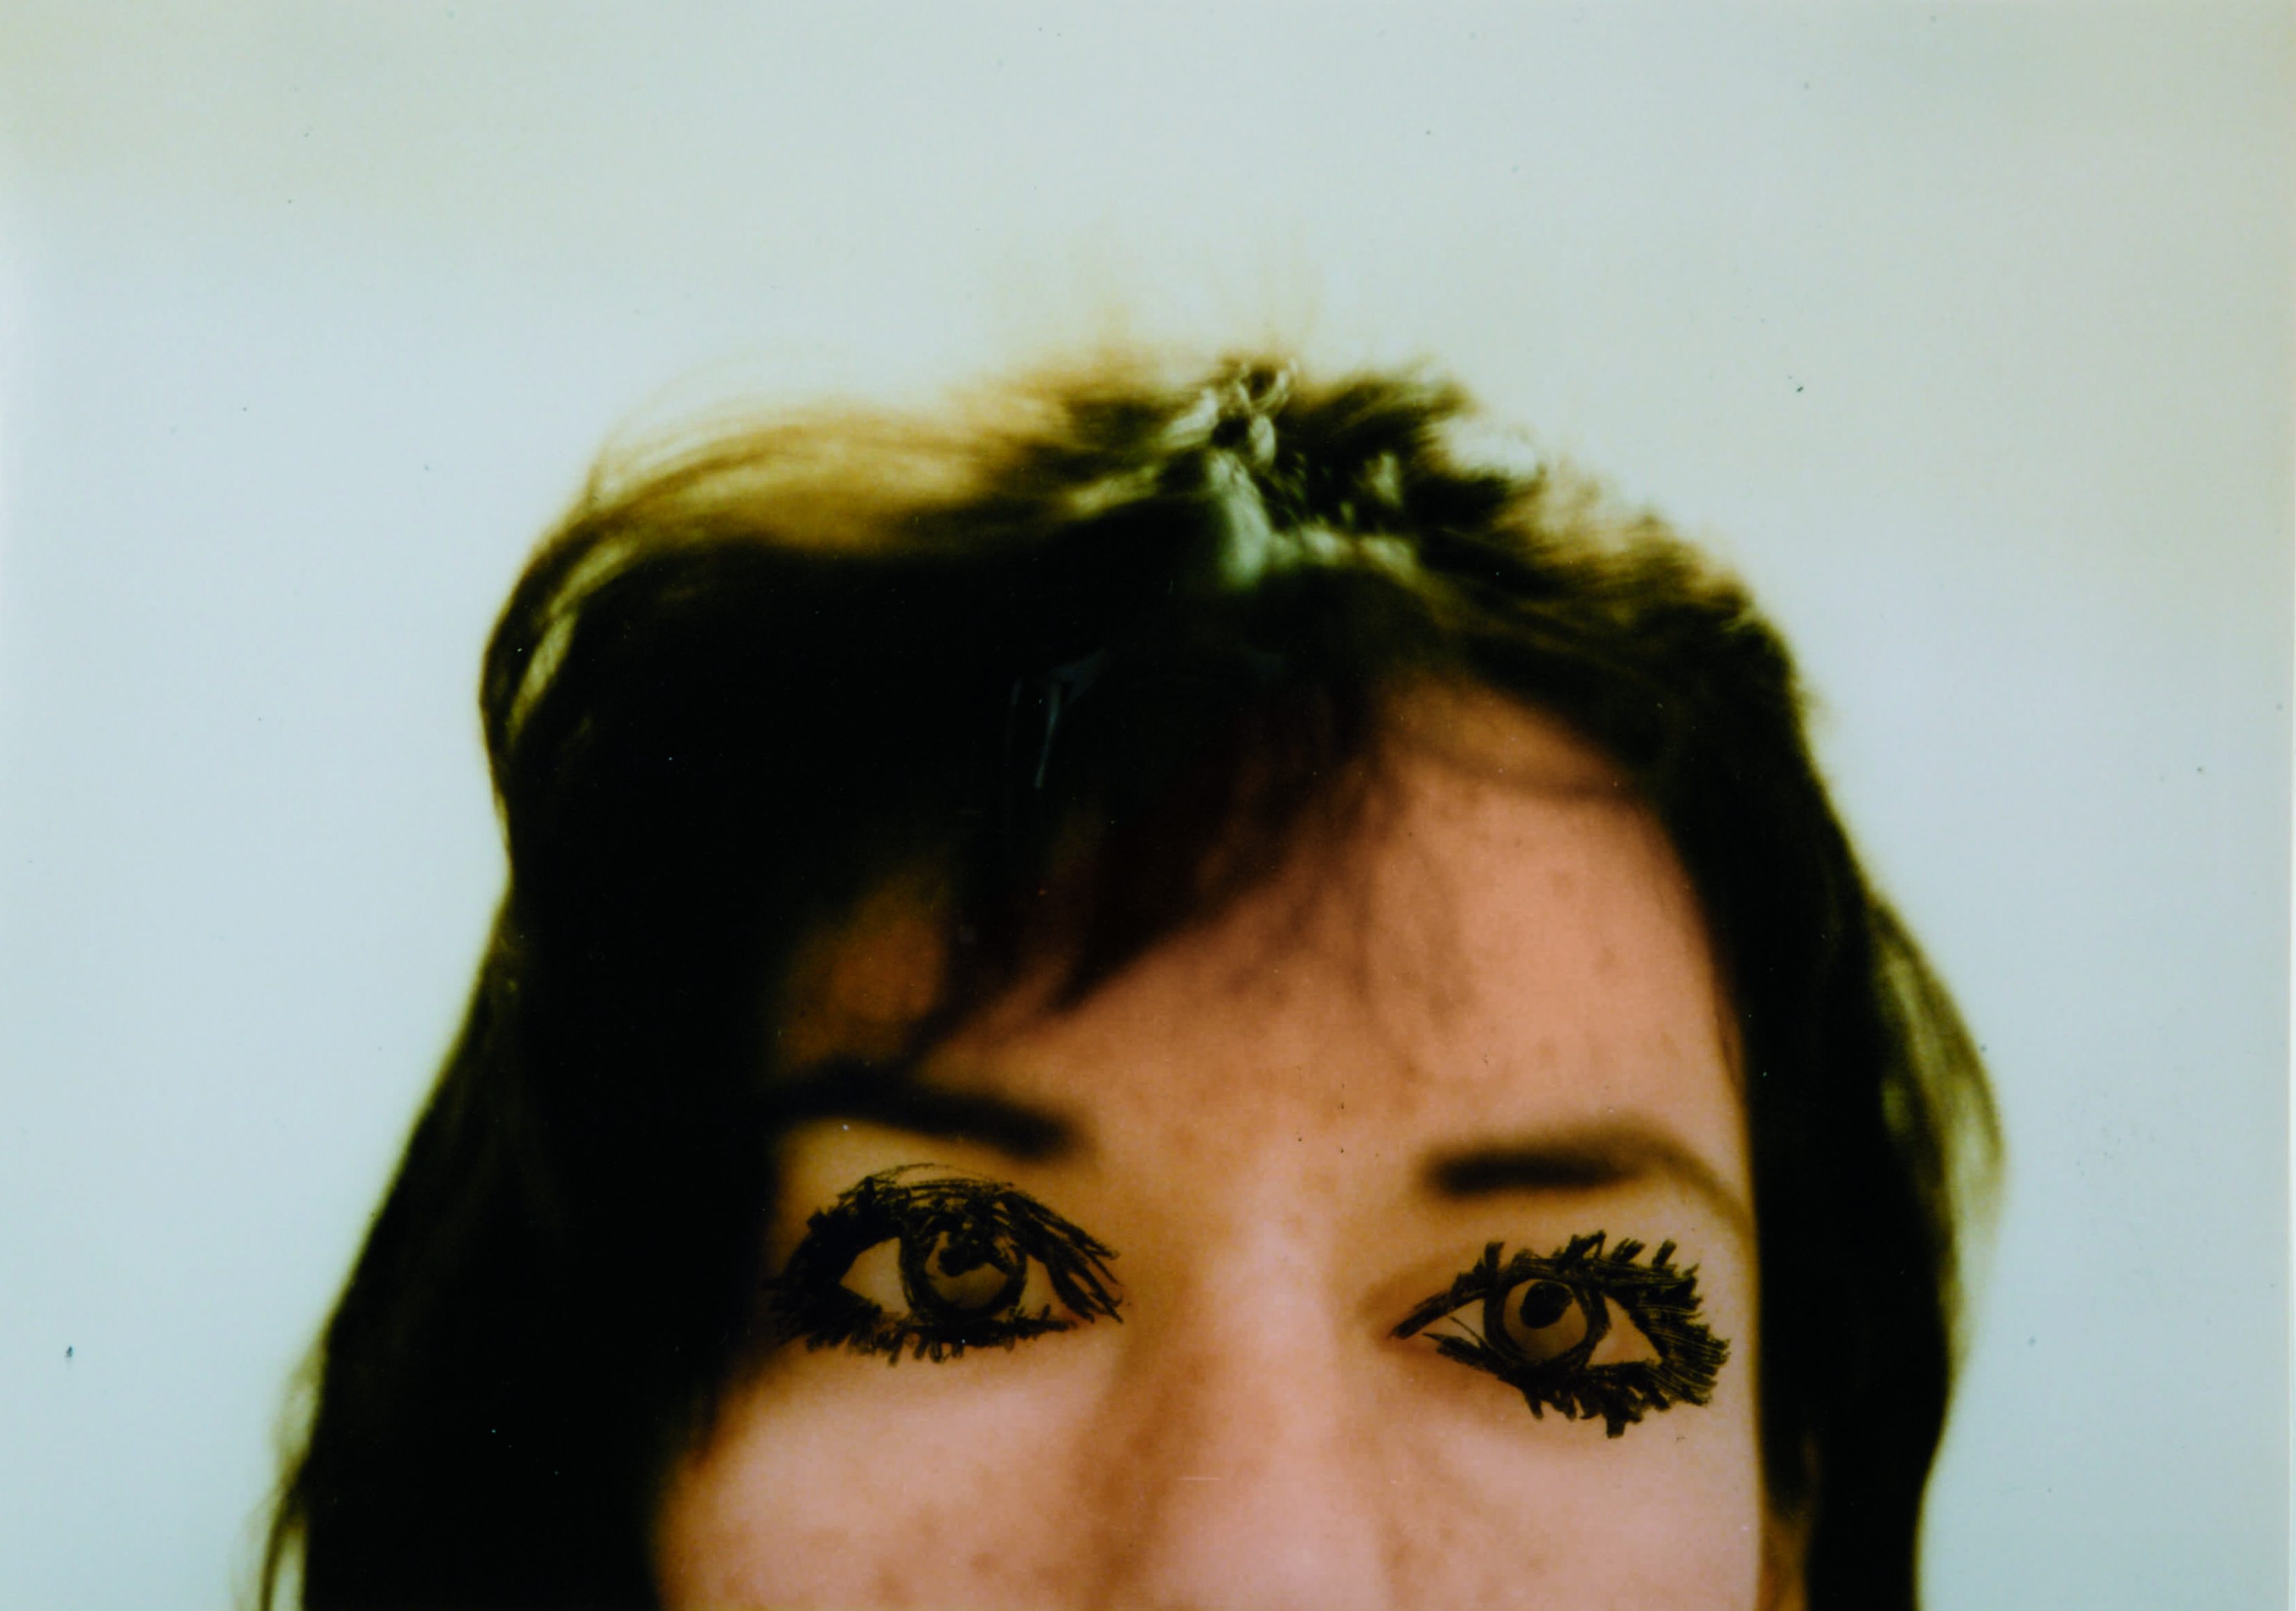 Me with Contact Lenses, 1988